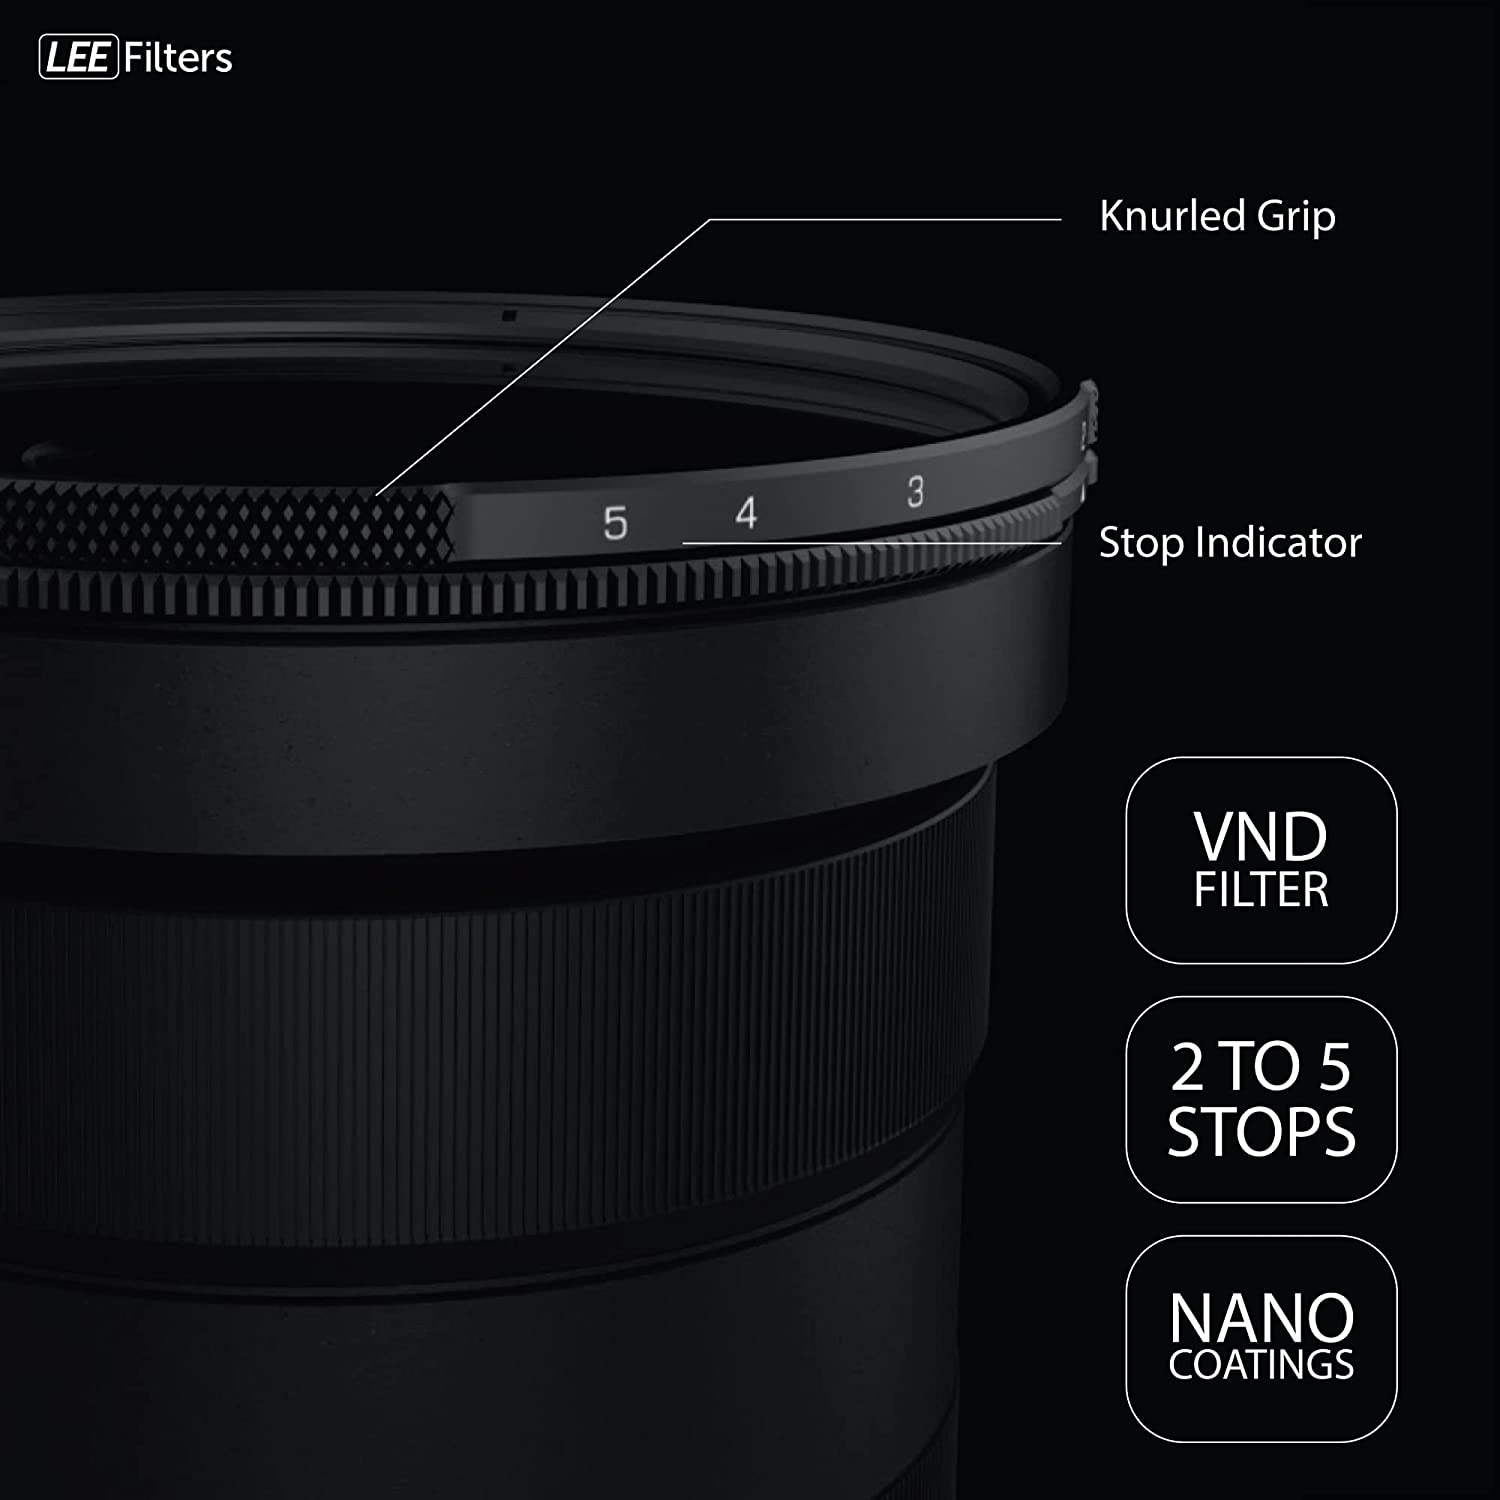 LEE Elements VND Filter, Variable Neutral Density, Featuring 2 to 5 Stops for Mirrorless and DSLR Cameras